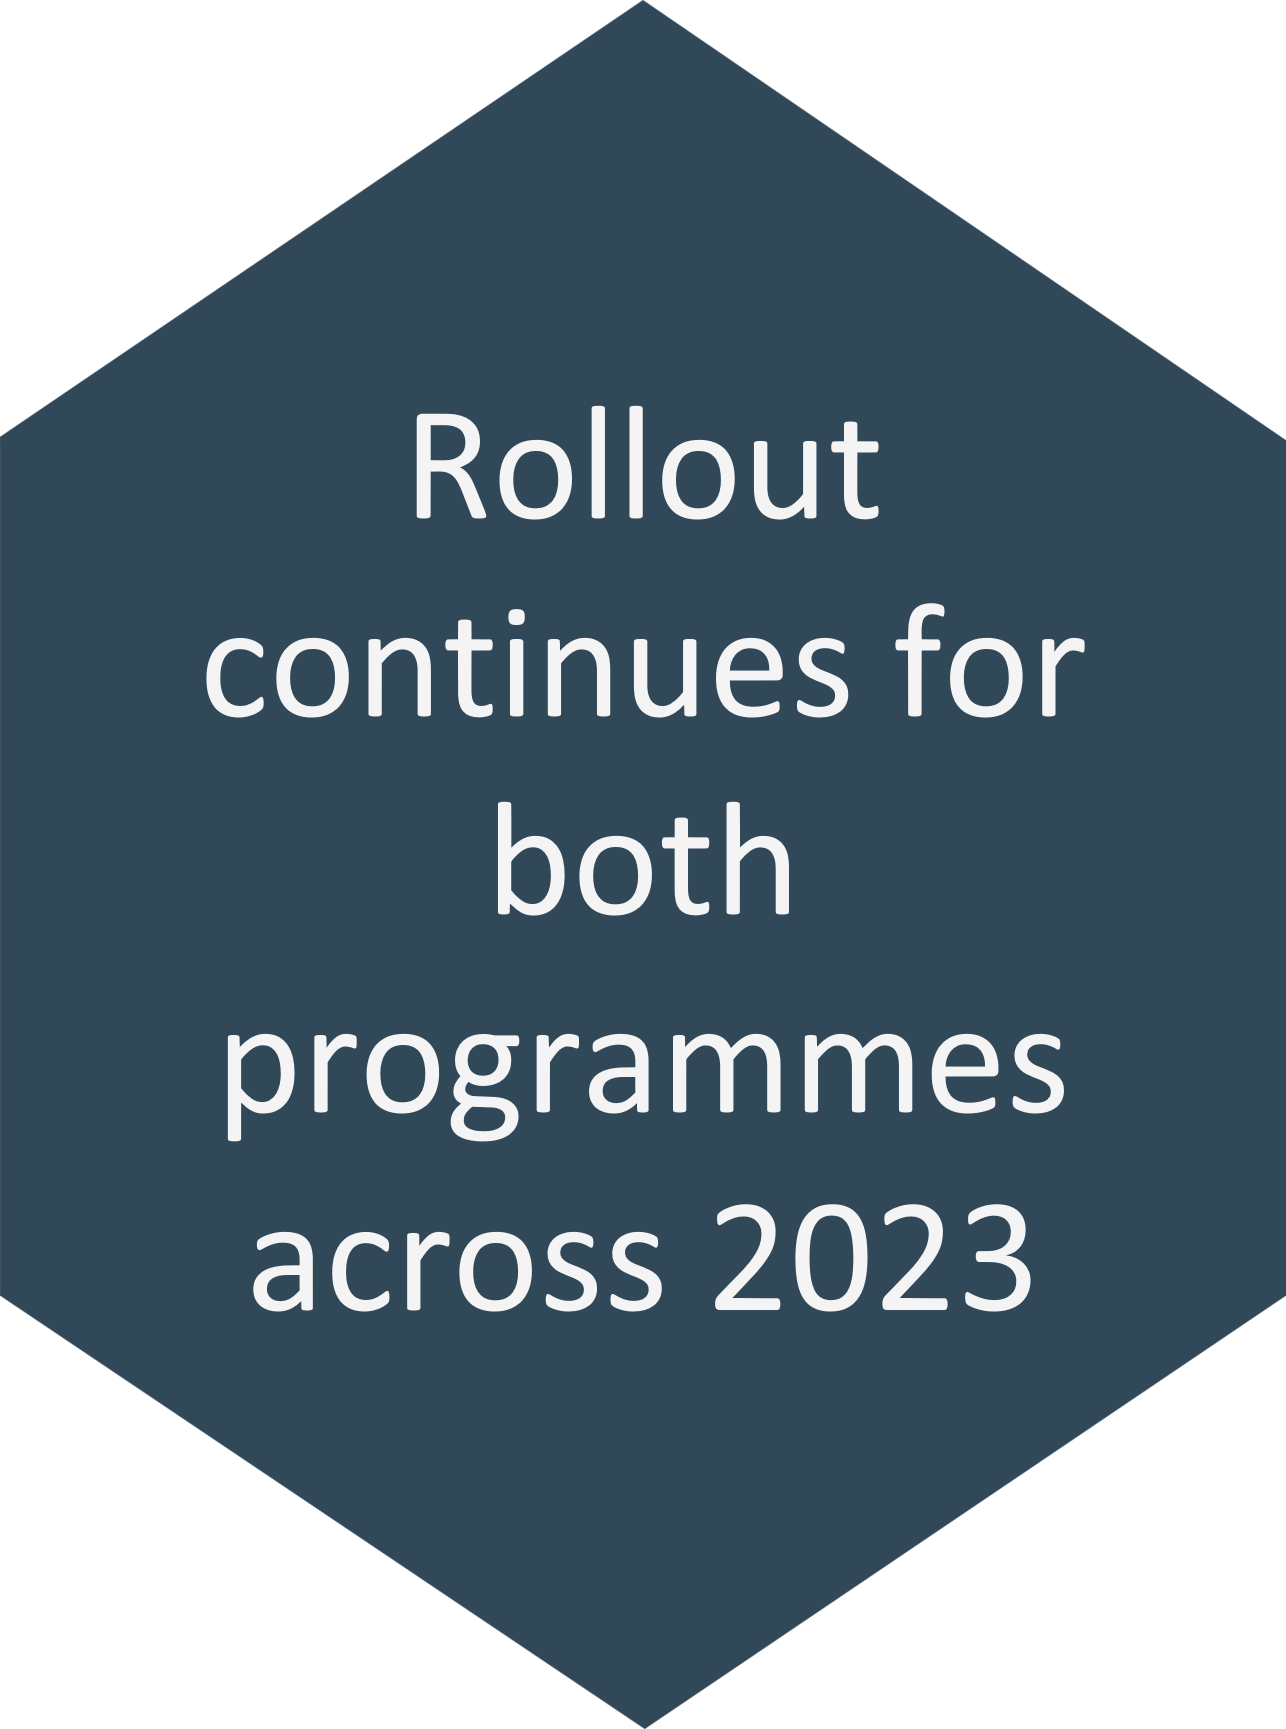 A dark grey hexagon with 'Rollout continues for both programmes across 2023' in white writing inside.